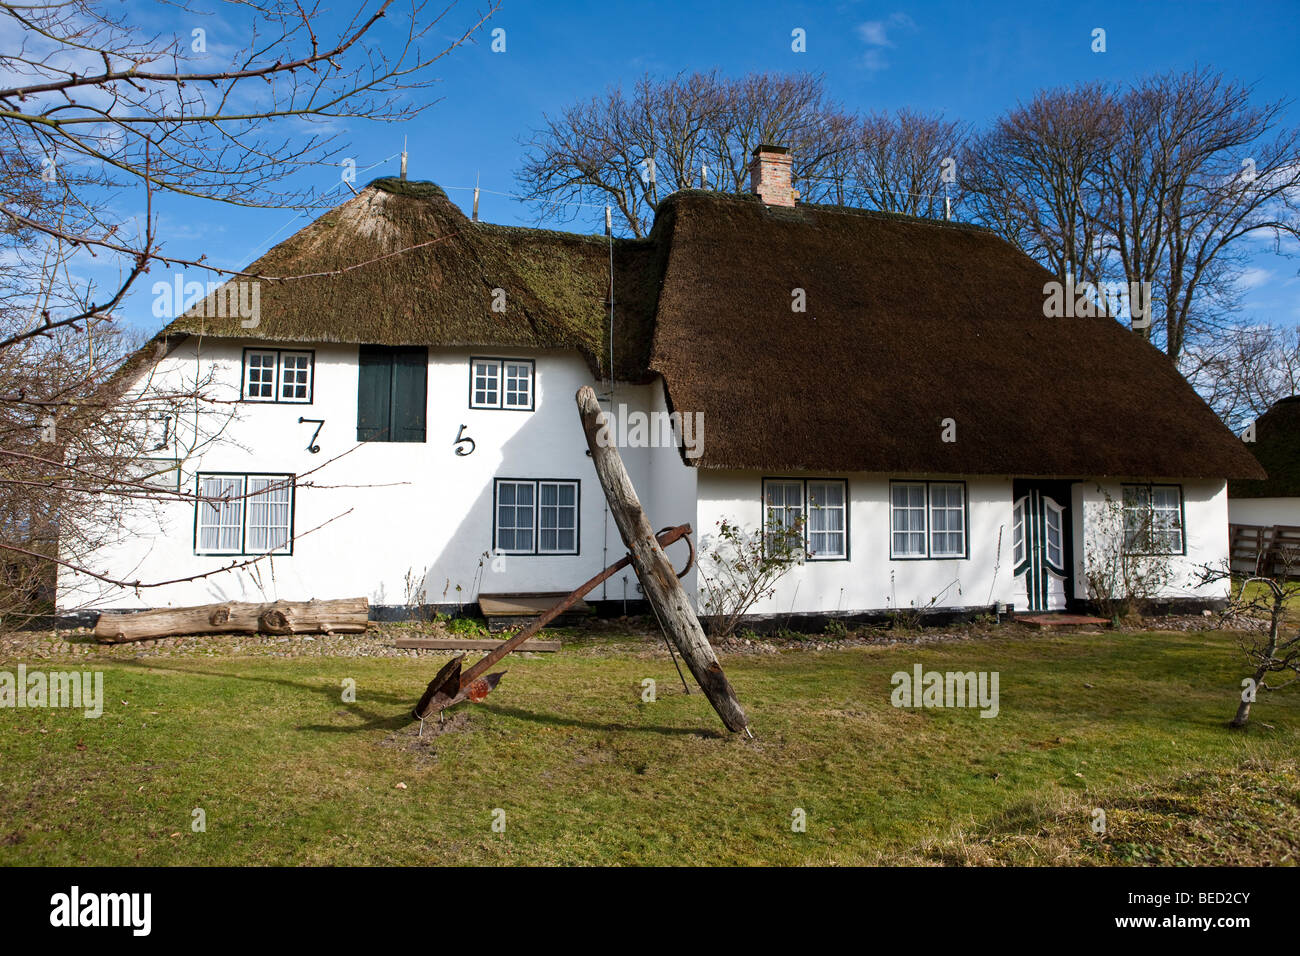 Typical house with a thatched roof, Keitum, Sylt Island, North Frisian Islands, Schleswig-Holstein, Germany, Europe Stock Photo